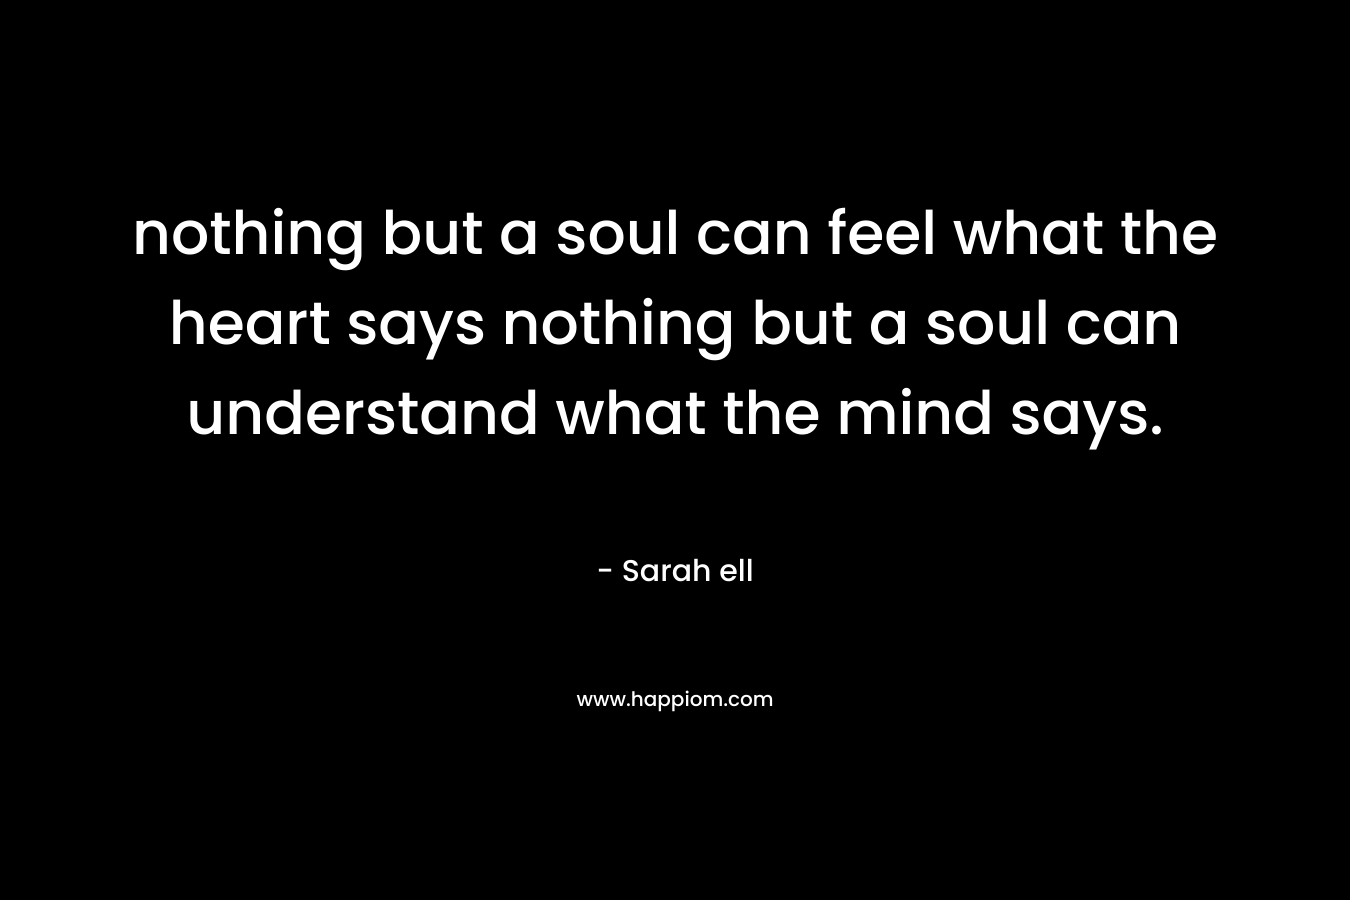 nothing but a soul can feel what the heart says nothing but a soul can understand what the mind says.